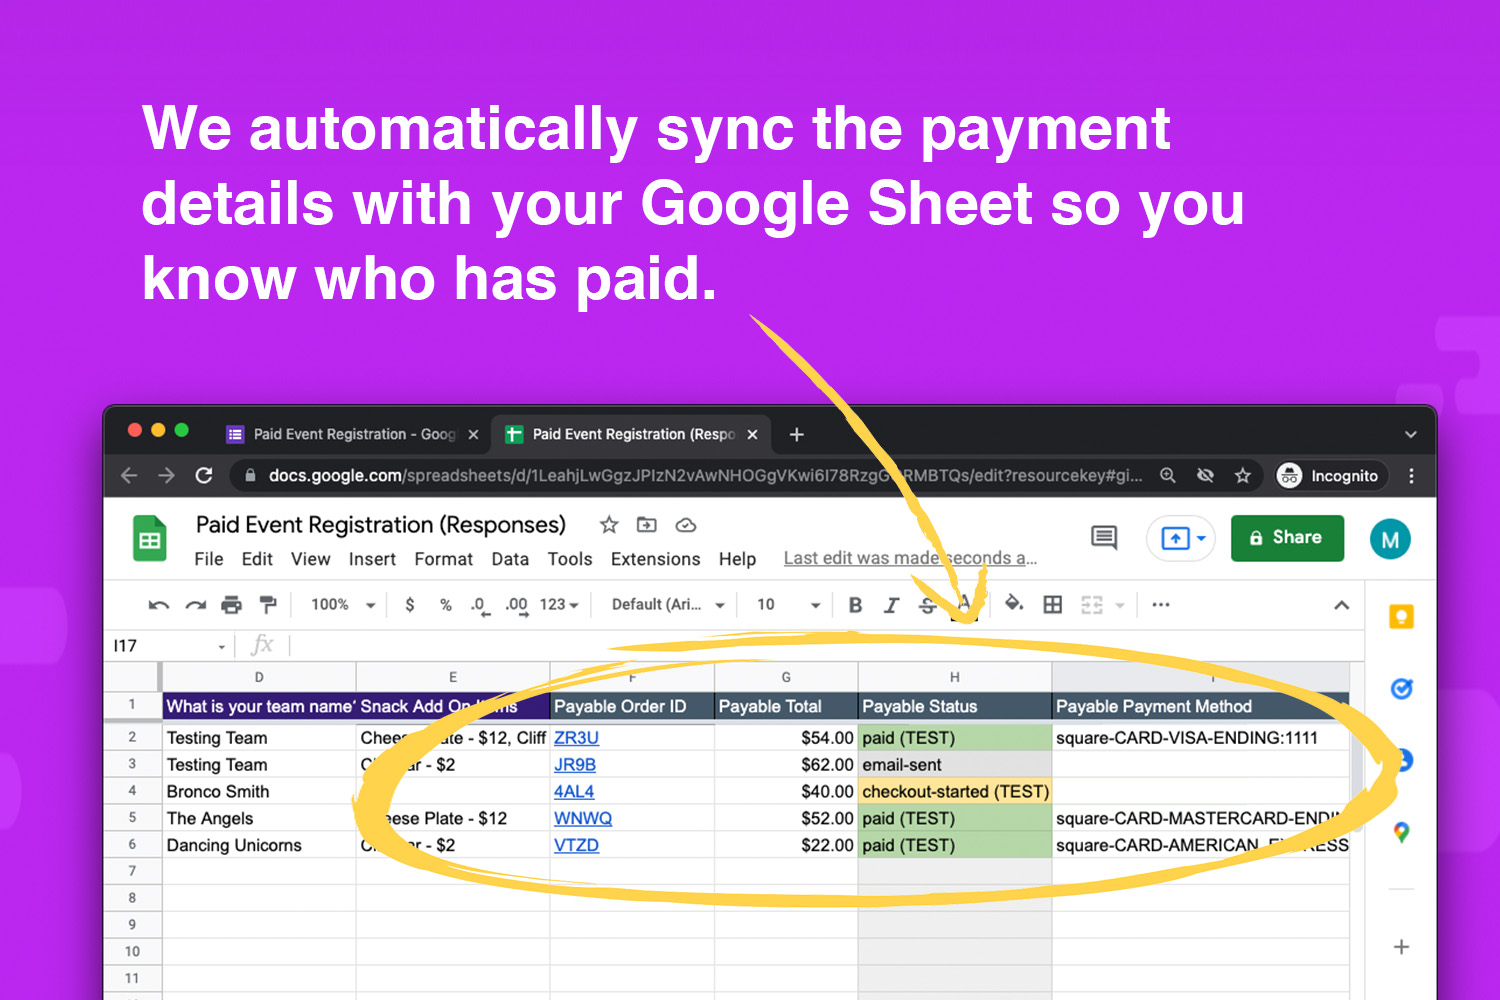 Payment Tracking in a Google Sheet from the Google Form Data